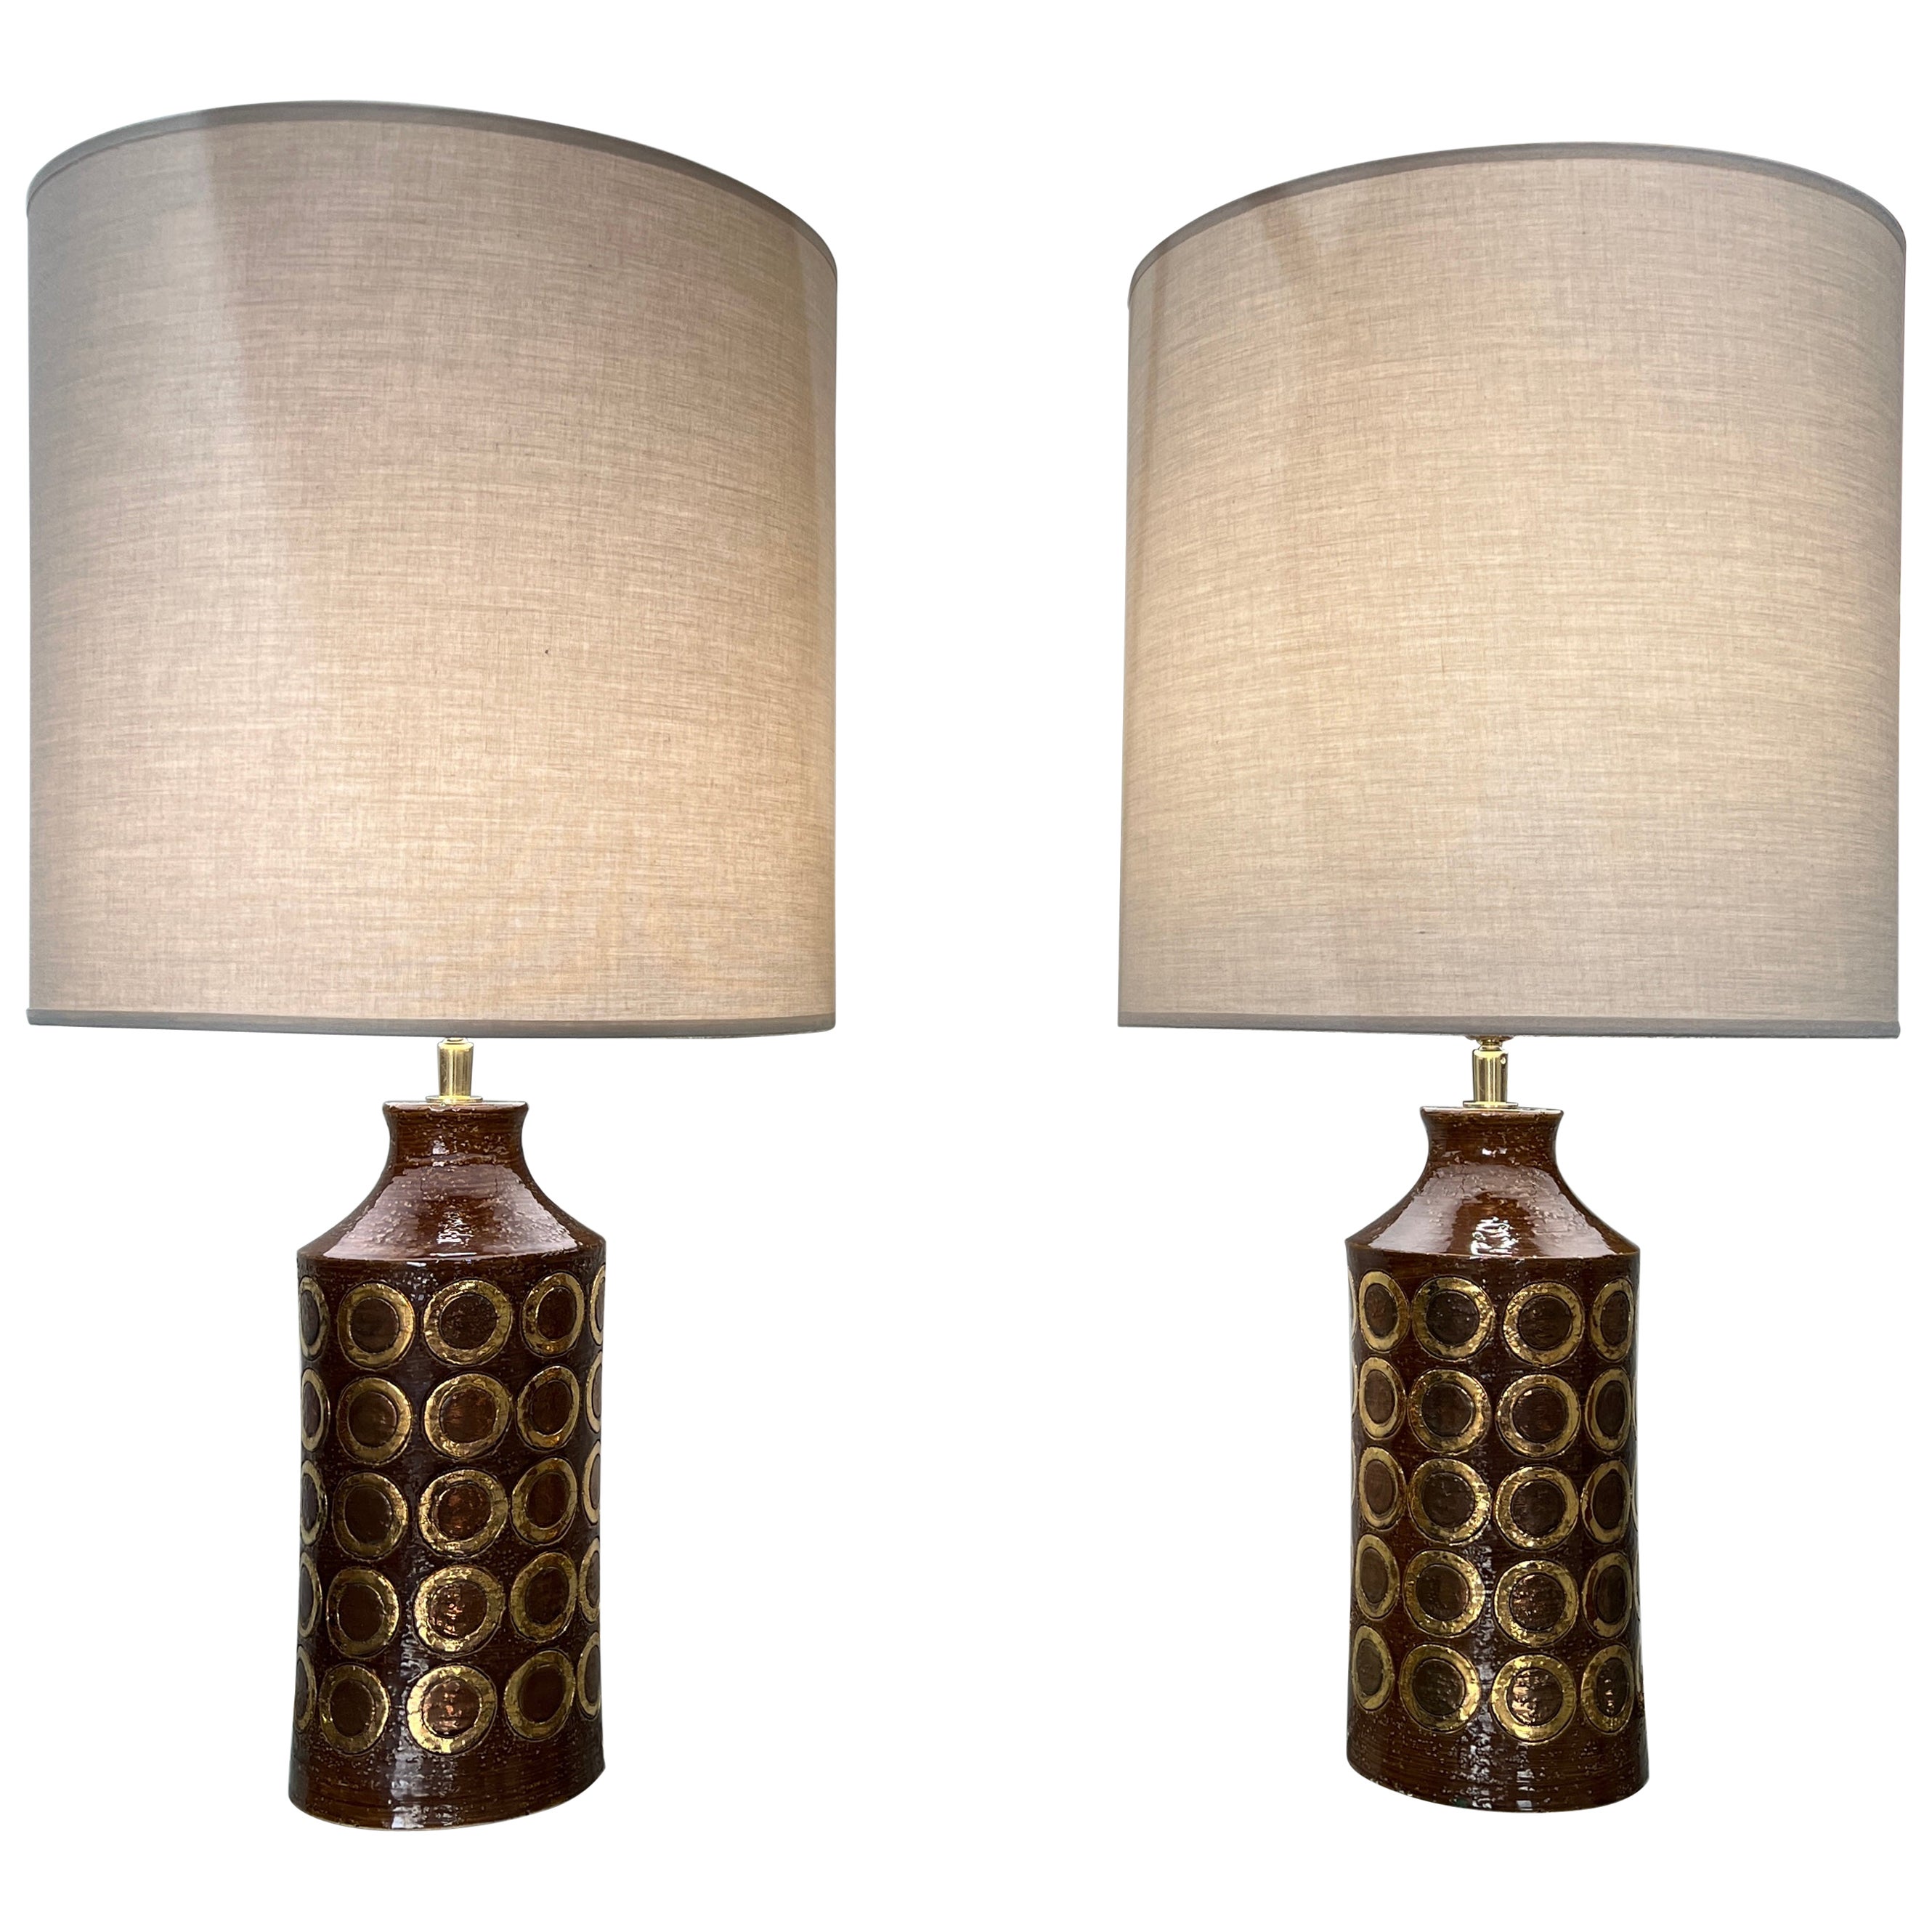 Pair of Python Skin Lamps For Sale at 1stDibs